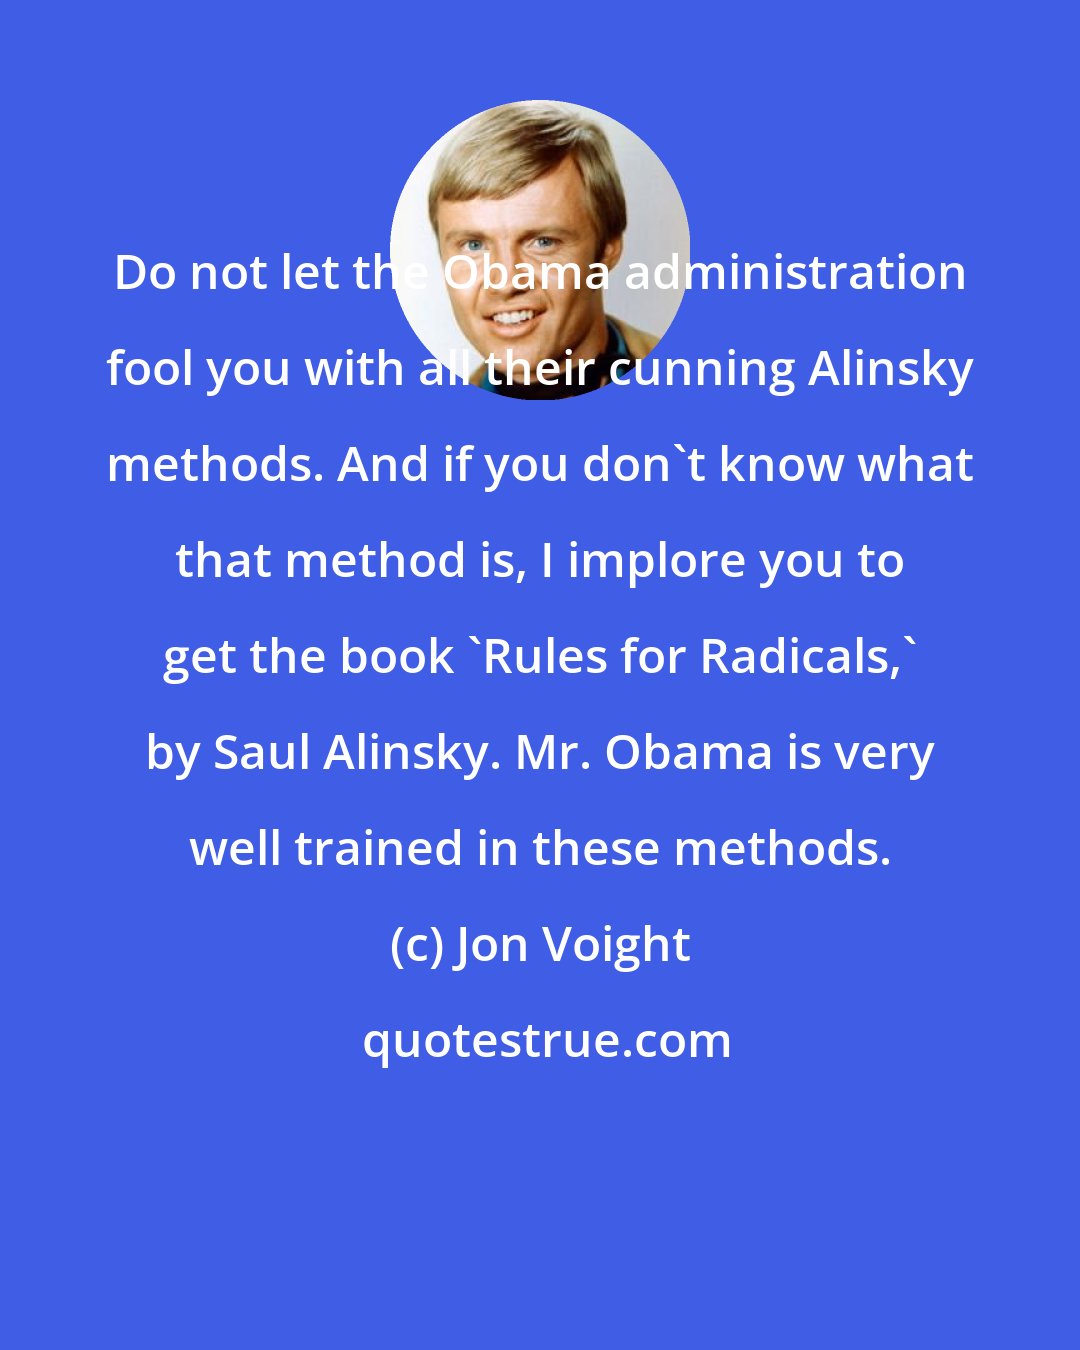 Jon Voight: Do not let the Obama administration fool you with all their cunning Alinsky methods. And if you don't know what that method is, I implore you to get the book 'Rules for Radicals,' by Saul Alinsky. Mr. Obama is very well trained in these methods.